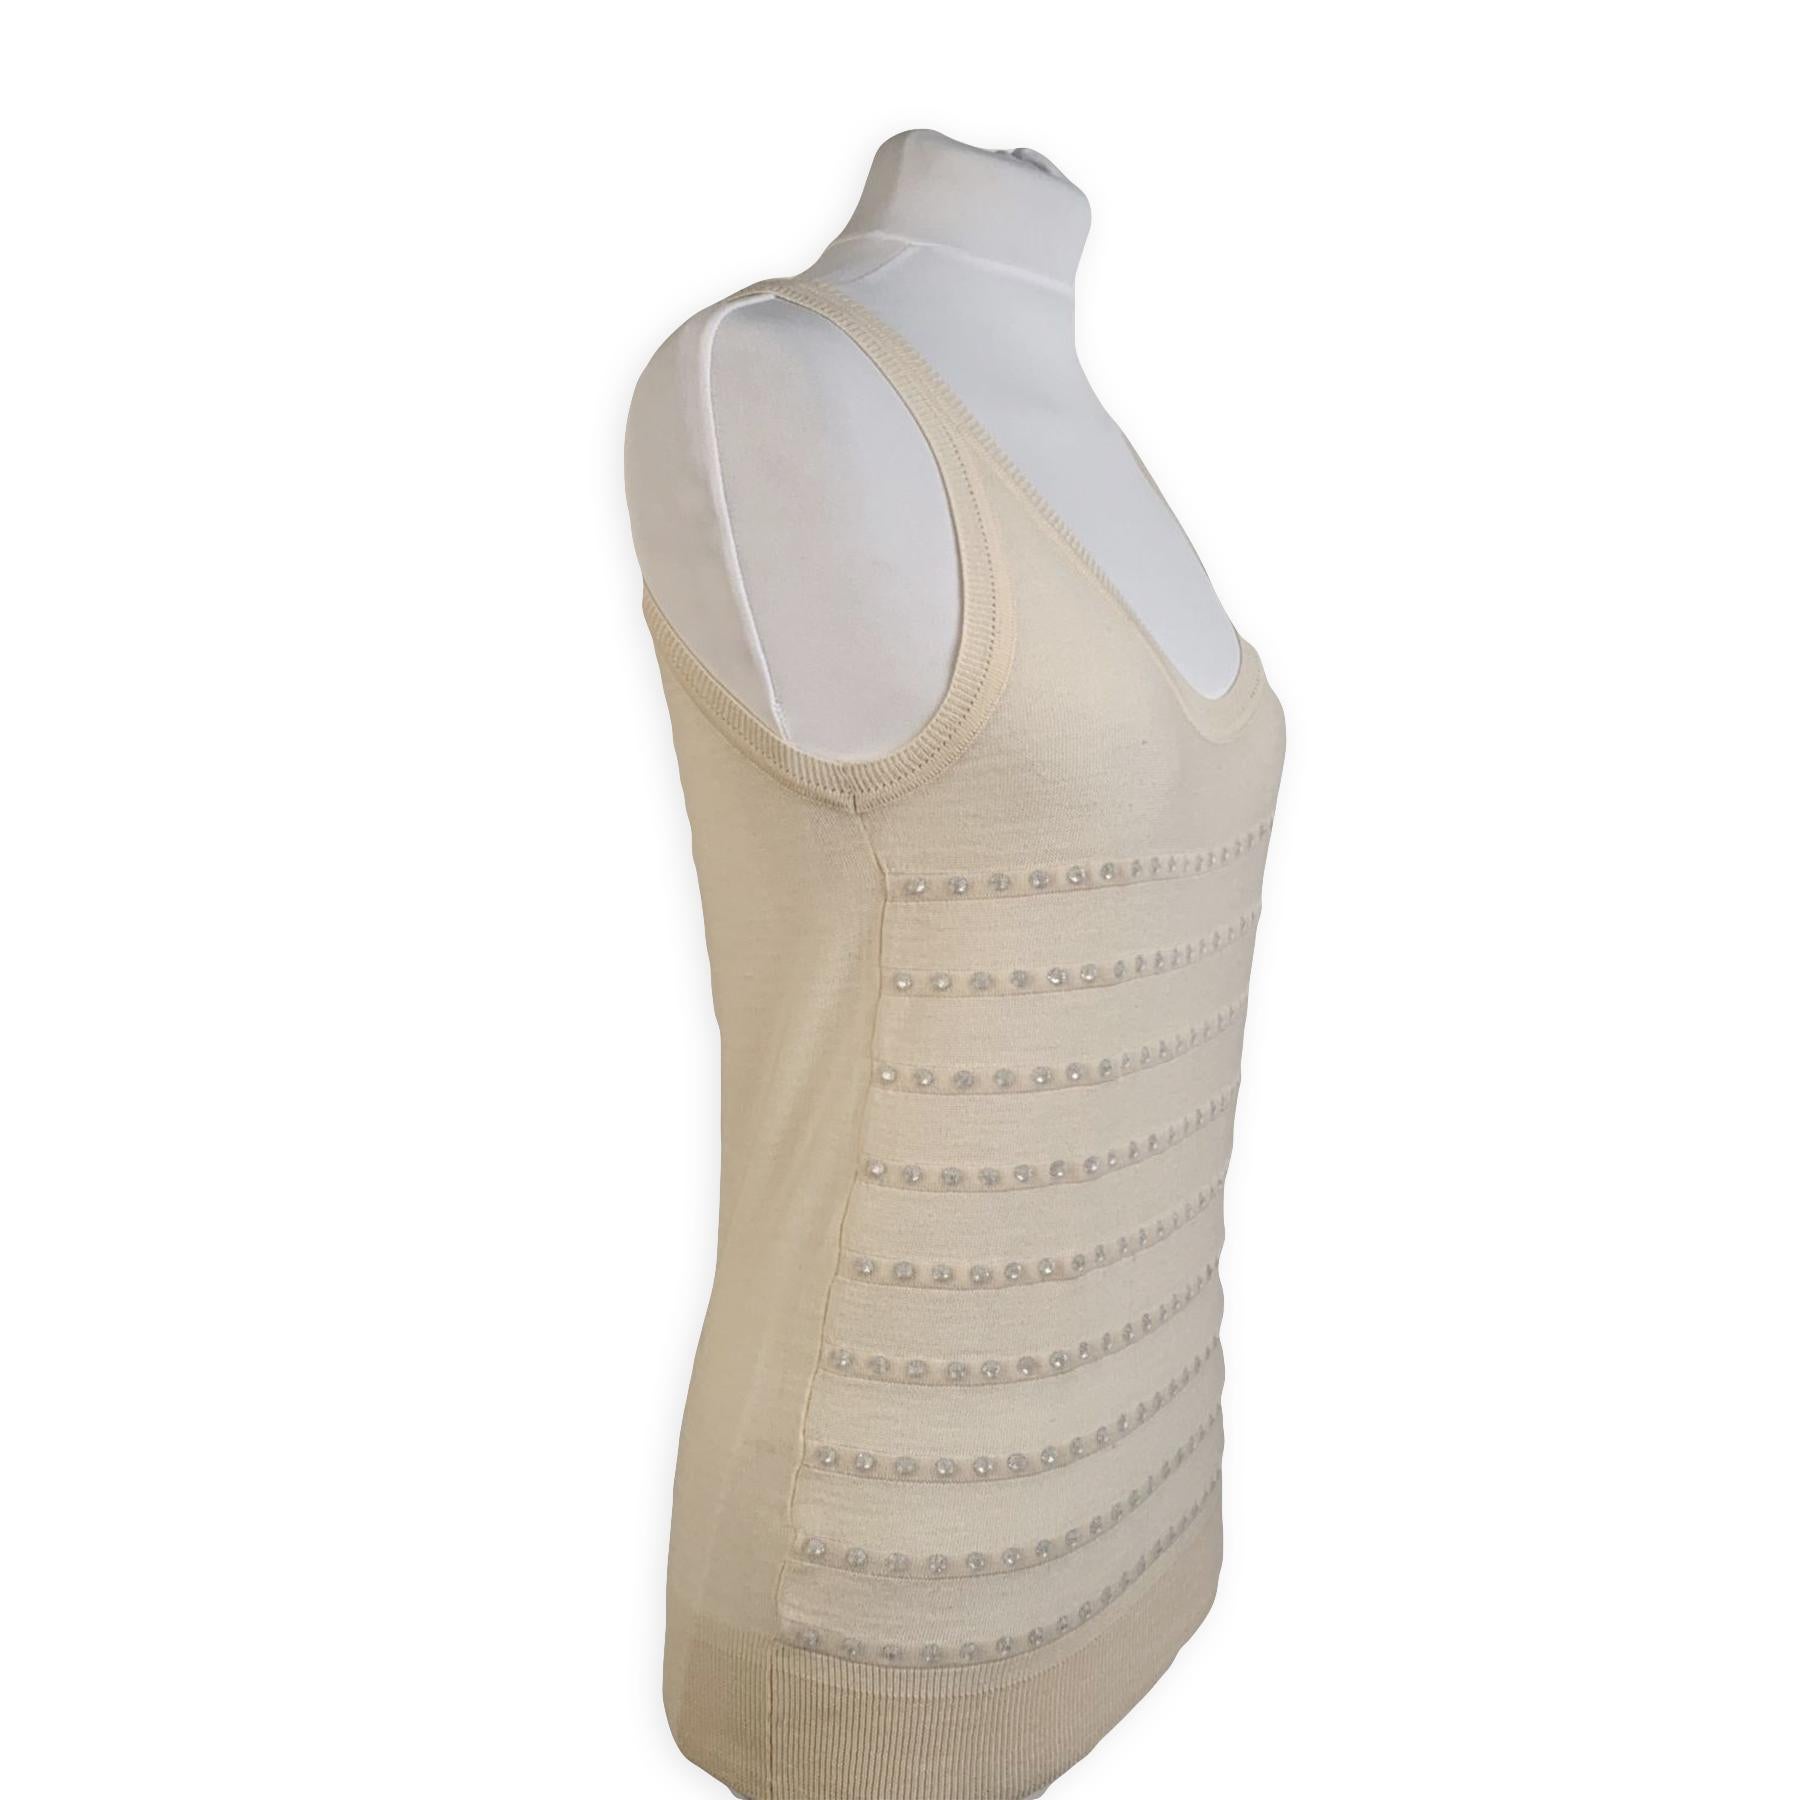 Sonia Rykiel sleeveless tank top with rhinestones embellishment. Composition: 90% Wool, 8% Cotton, 2% Nylon. Sleeveless design and scoop neckline. Size: 36 FR (It should correspond to a SMALL size). Made in Italy.



Details

MATERIAL: Wool